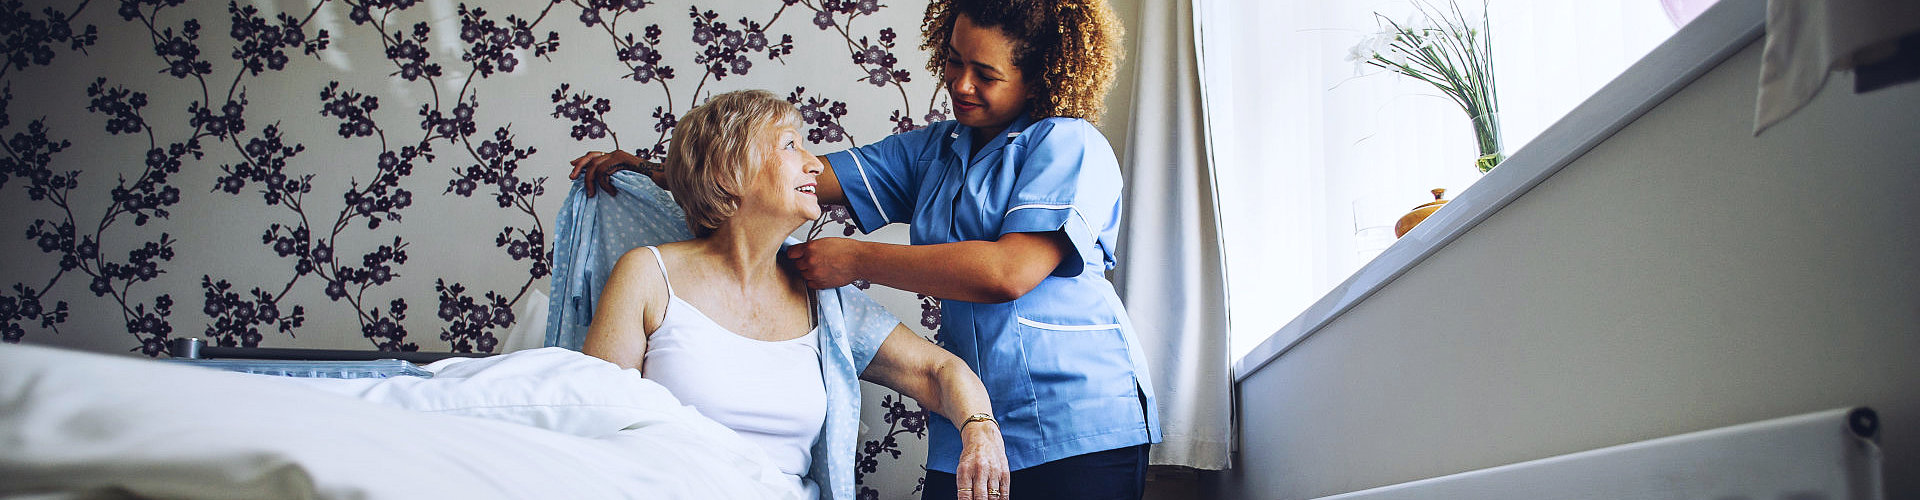 caregiver helping senior woman put on clothes